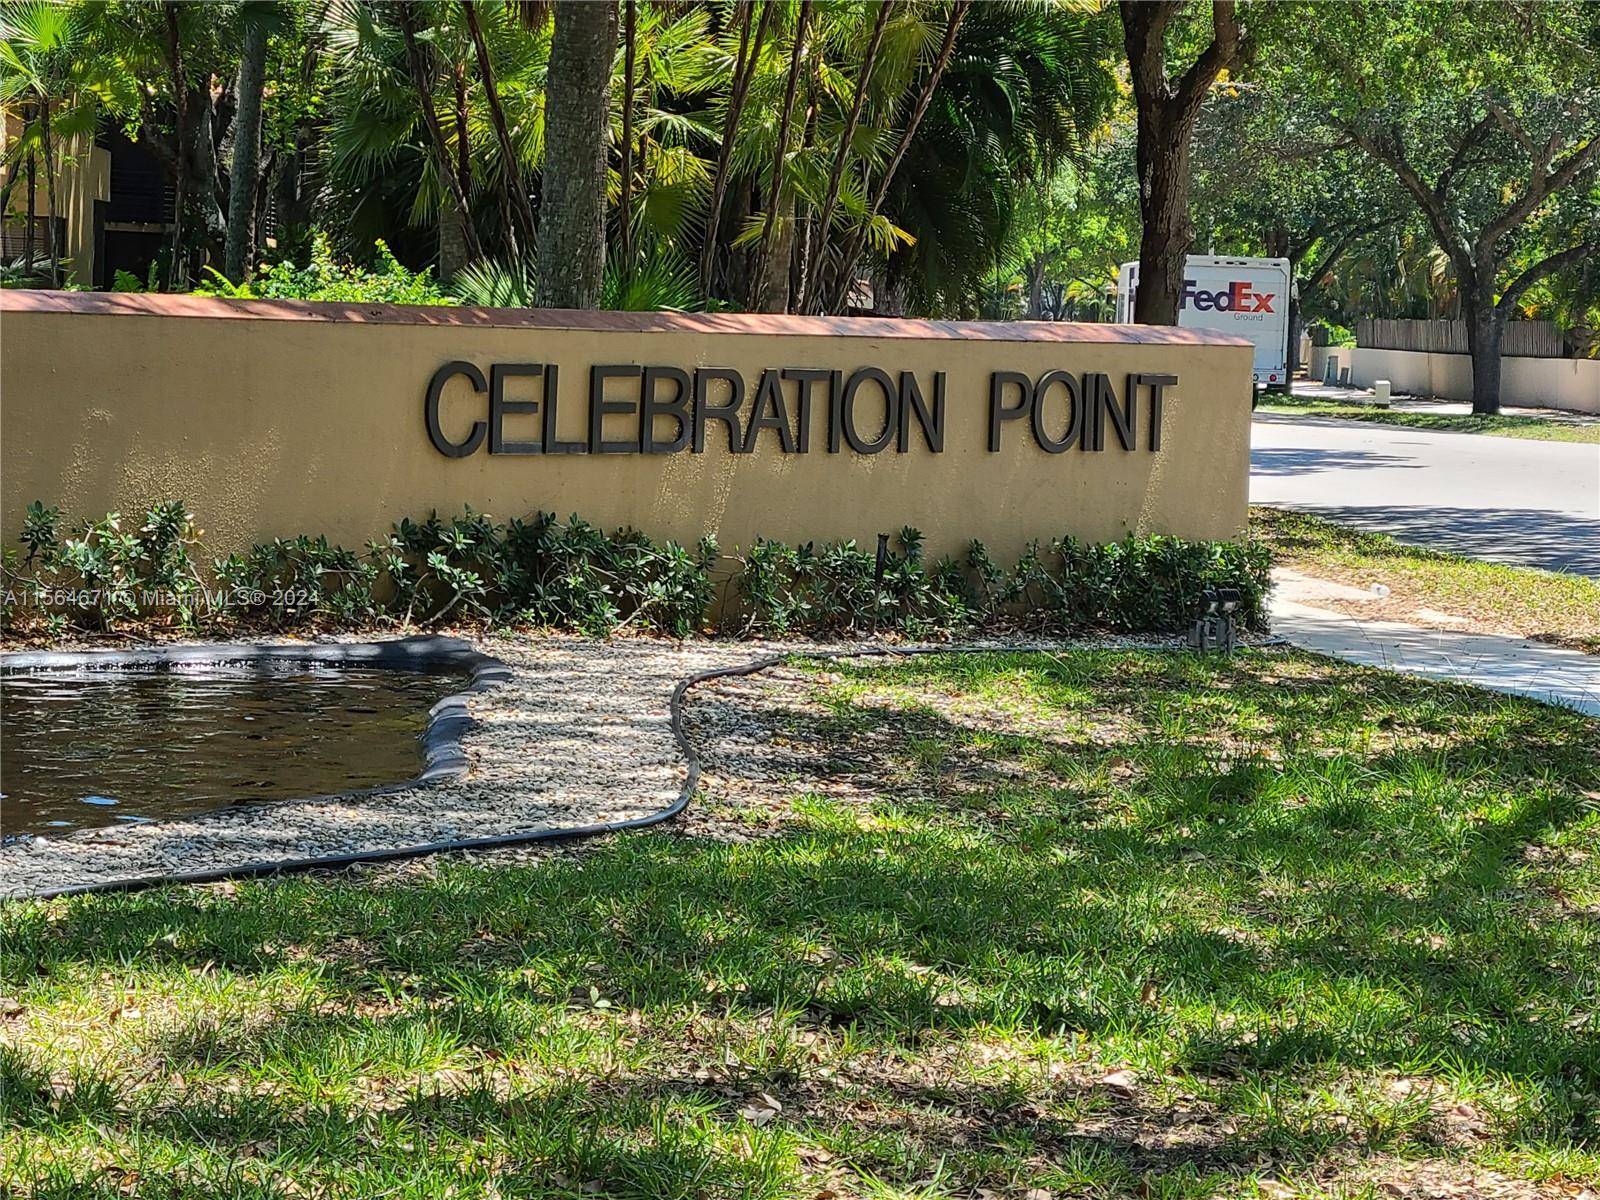 GREAT 2 BEDROOM 2 BATH ON FIRST FLOOR IN ONE OF THE BEST CONDO COMPLEX IN MIAMI LAKES CELEBRATION POINT.